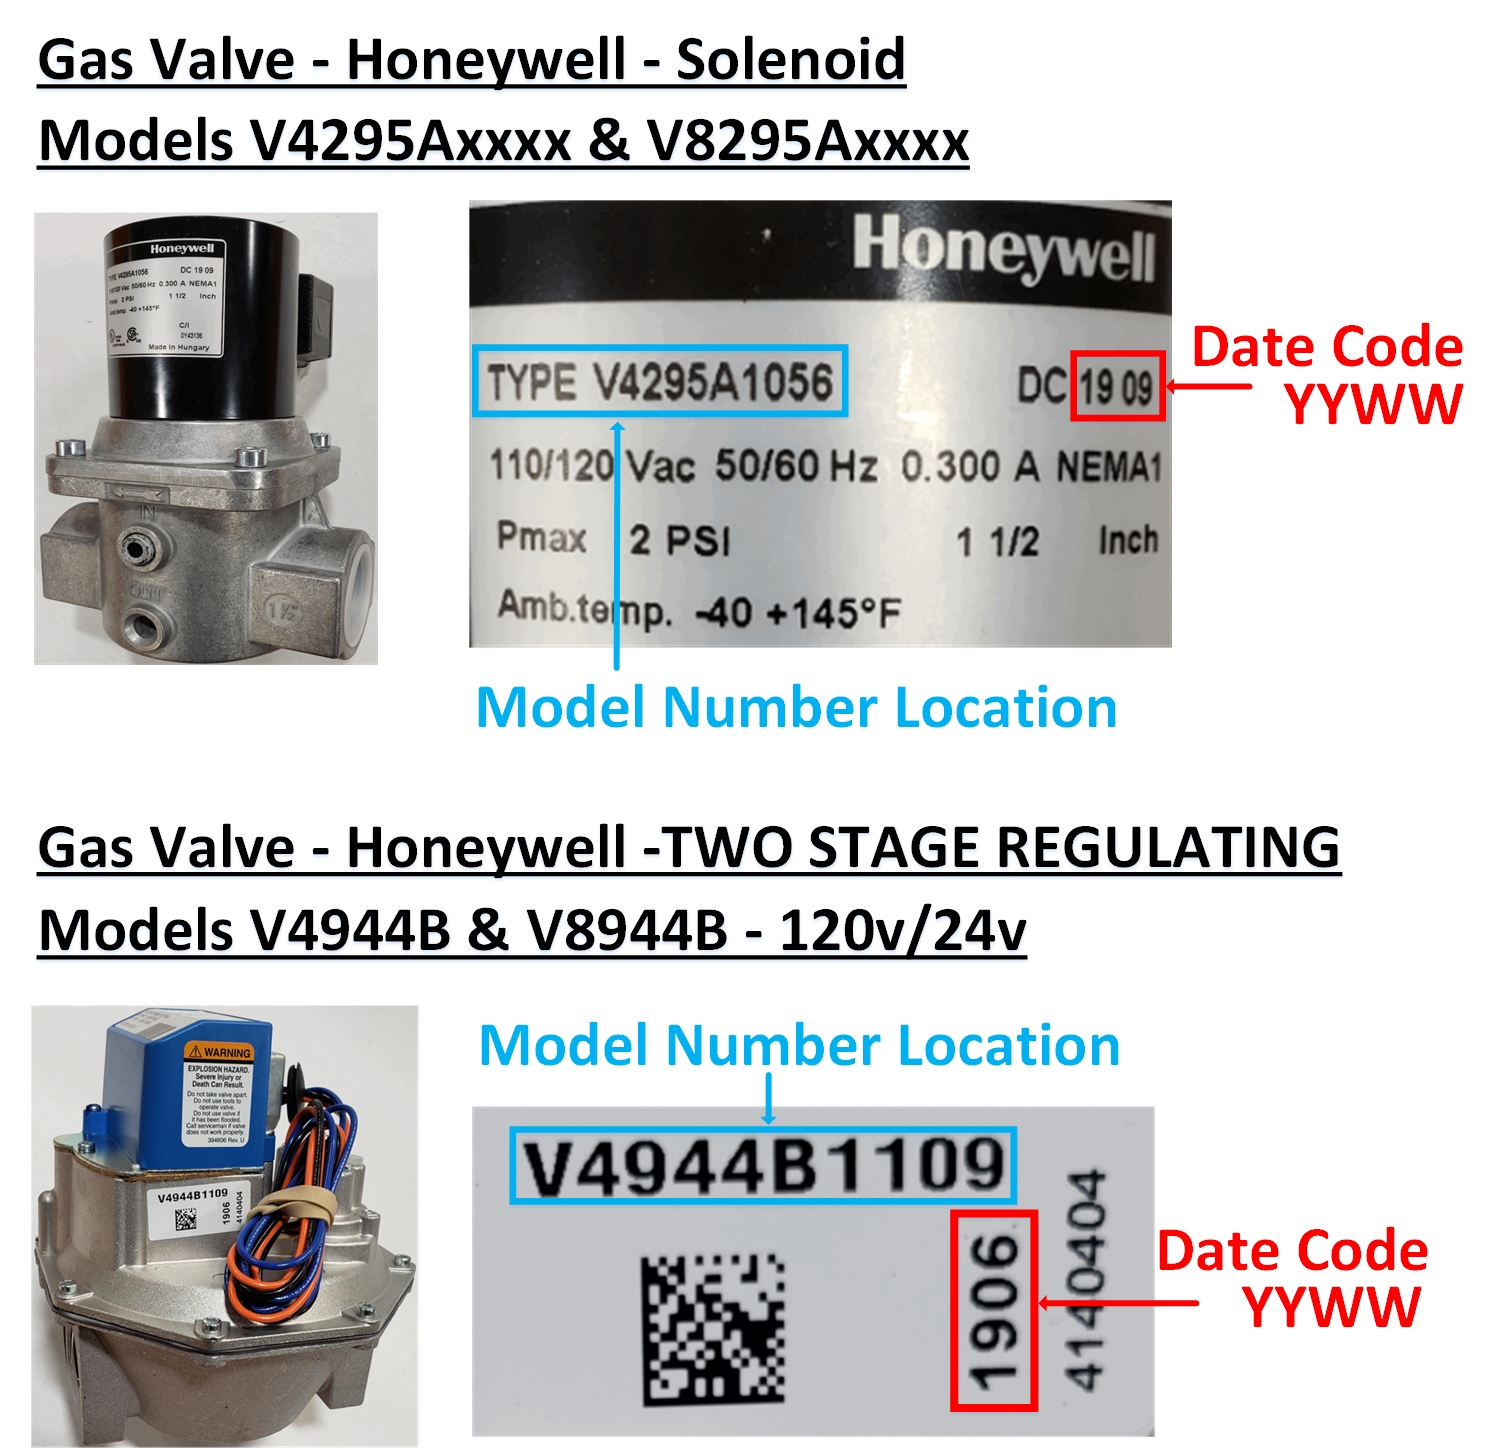 Actuated and Manual Valves